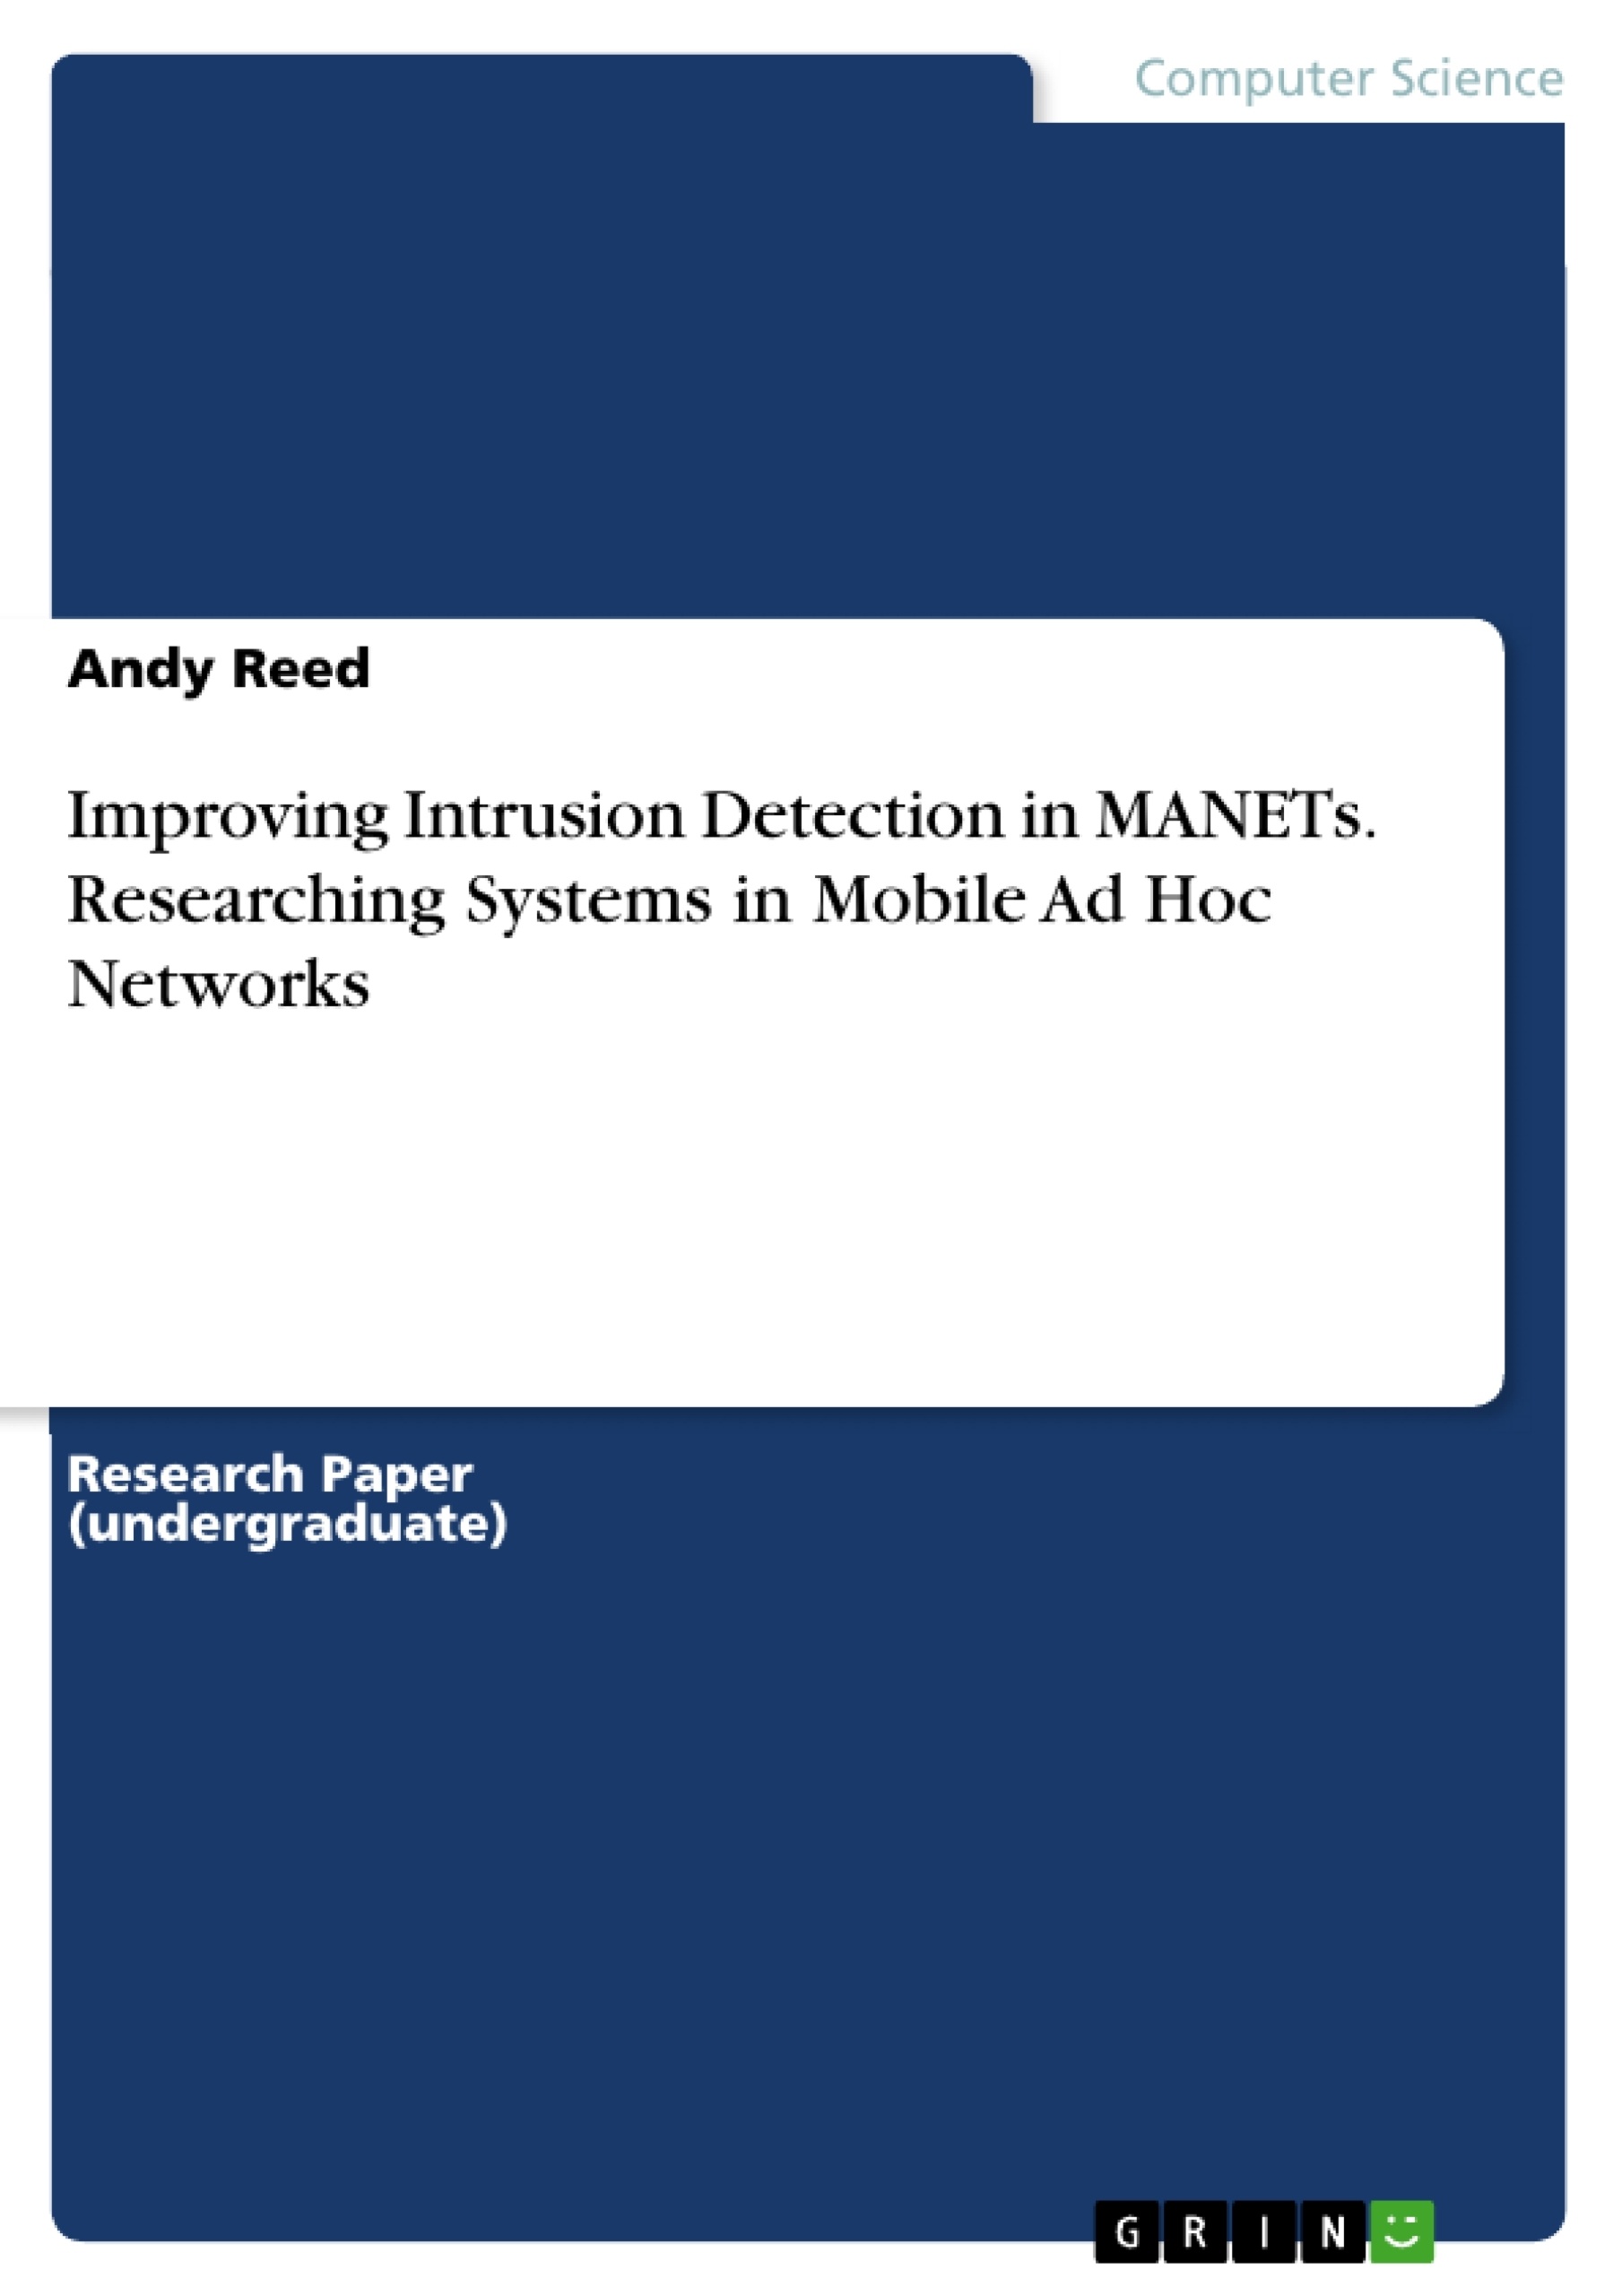 Titre: Improving Intrusion Detection in MANETs. Researching Systems in Mobile Ad Hoc Networks